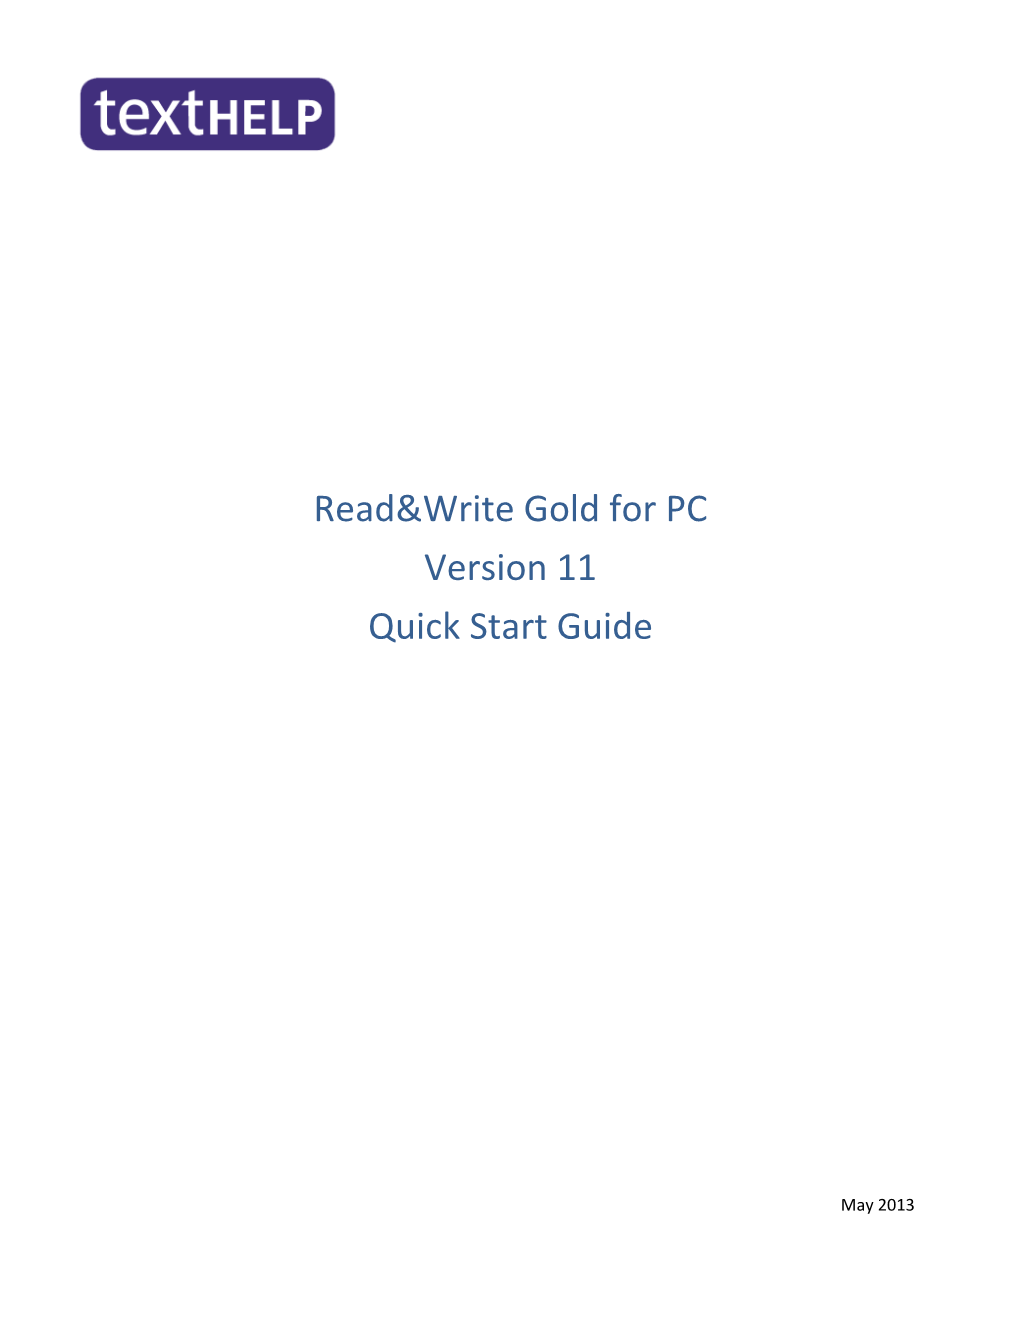 Read&Write Gold for PC Version 11 Quick Start Guide